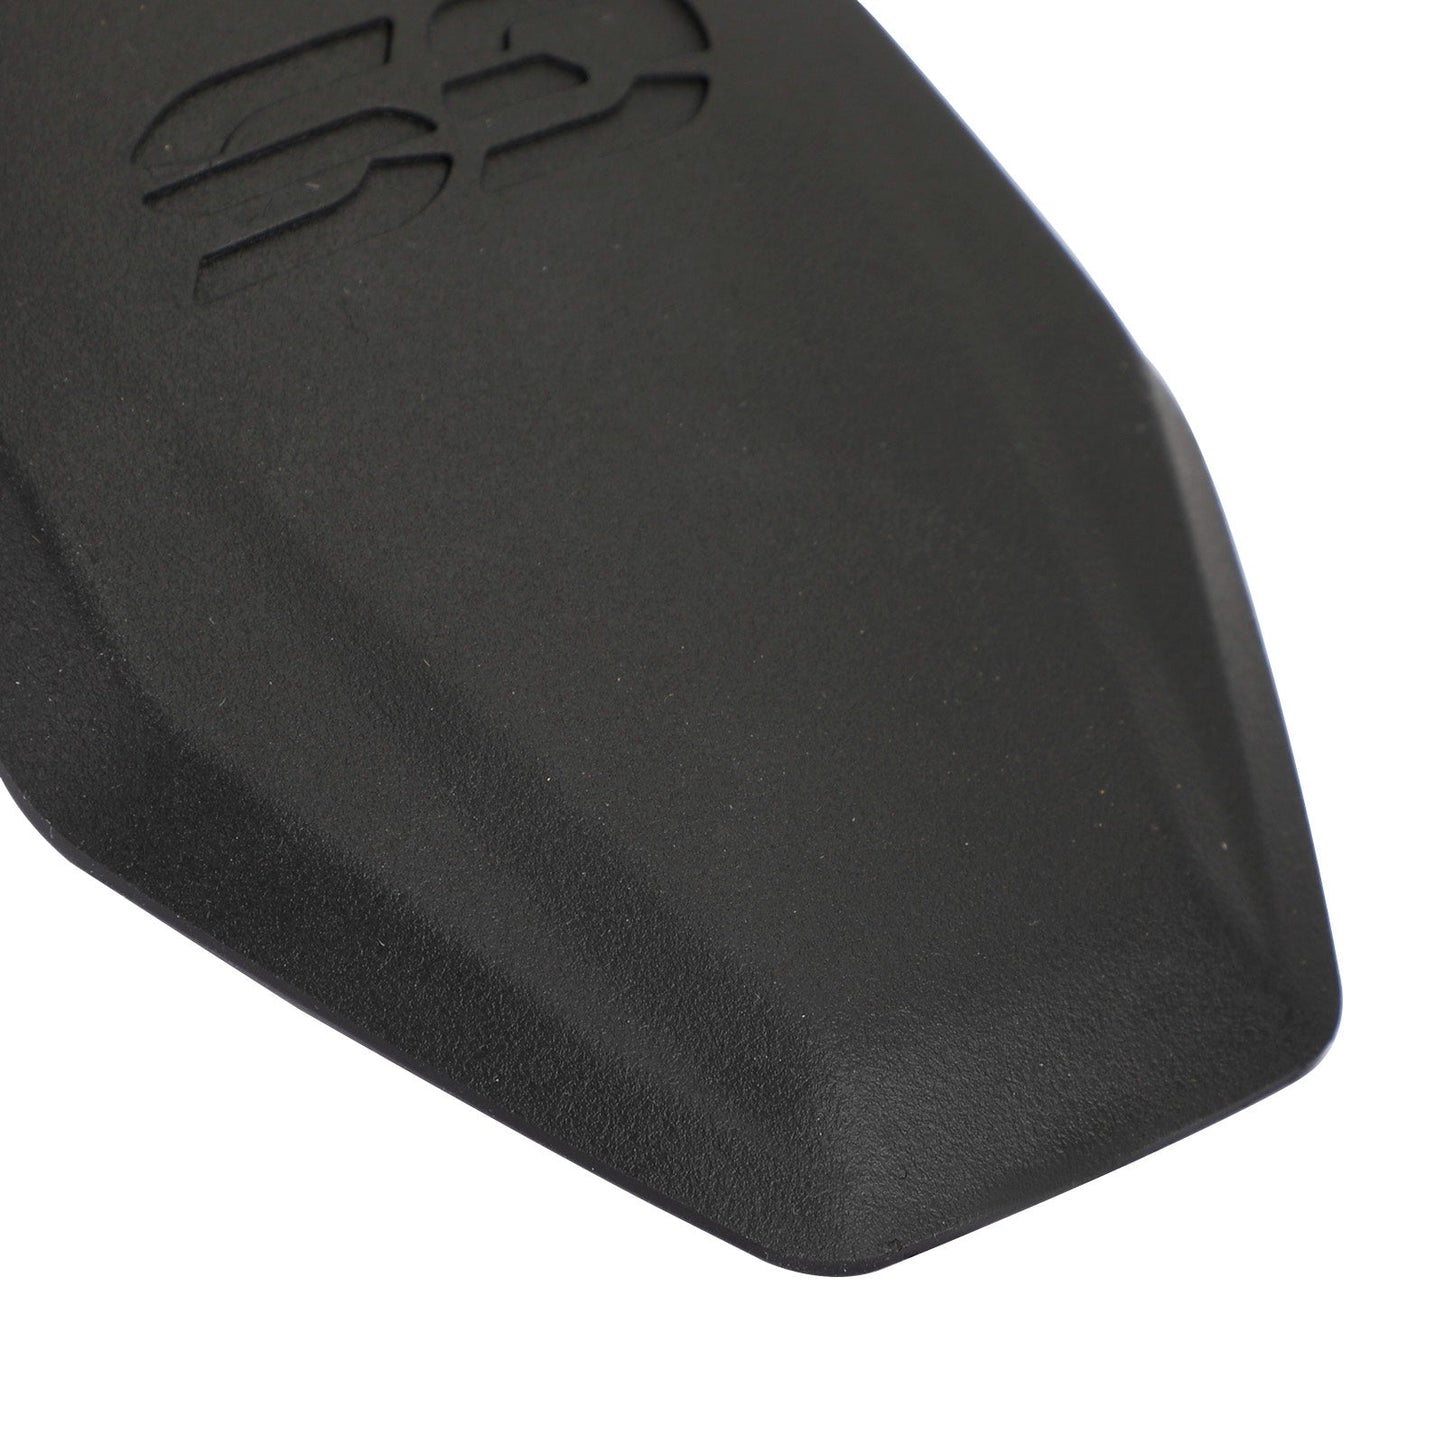 Gas Fuel Oil Tank Pad Protector Cover For BMW R1250GS R1200GS 2014-2022